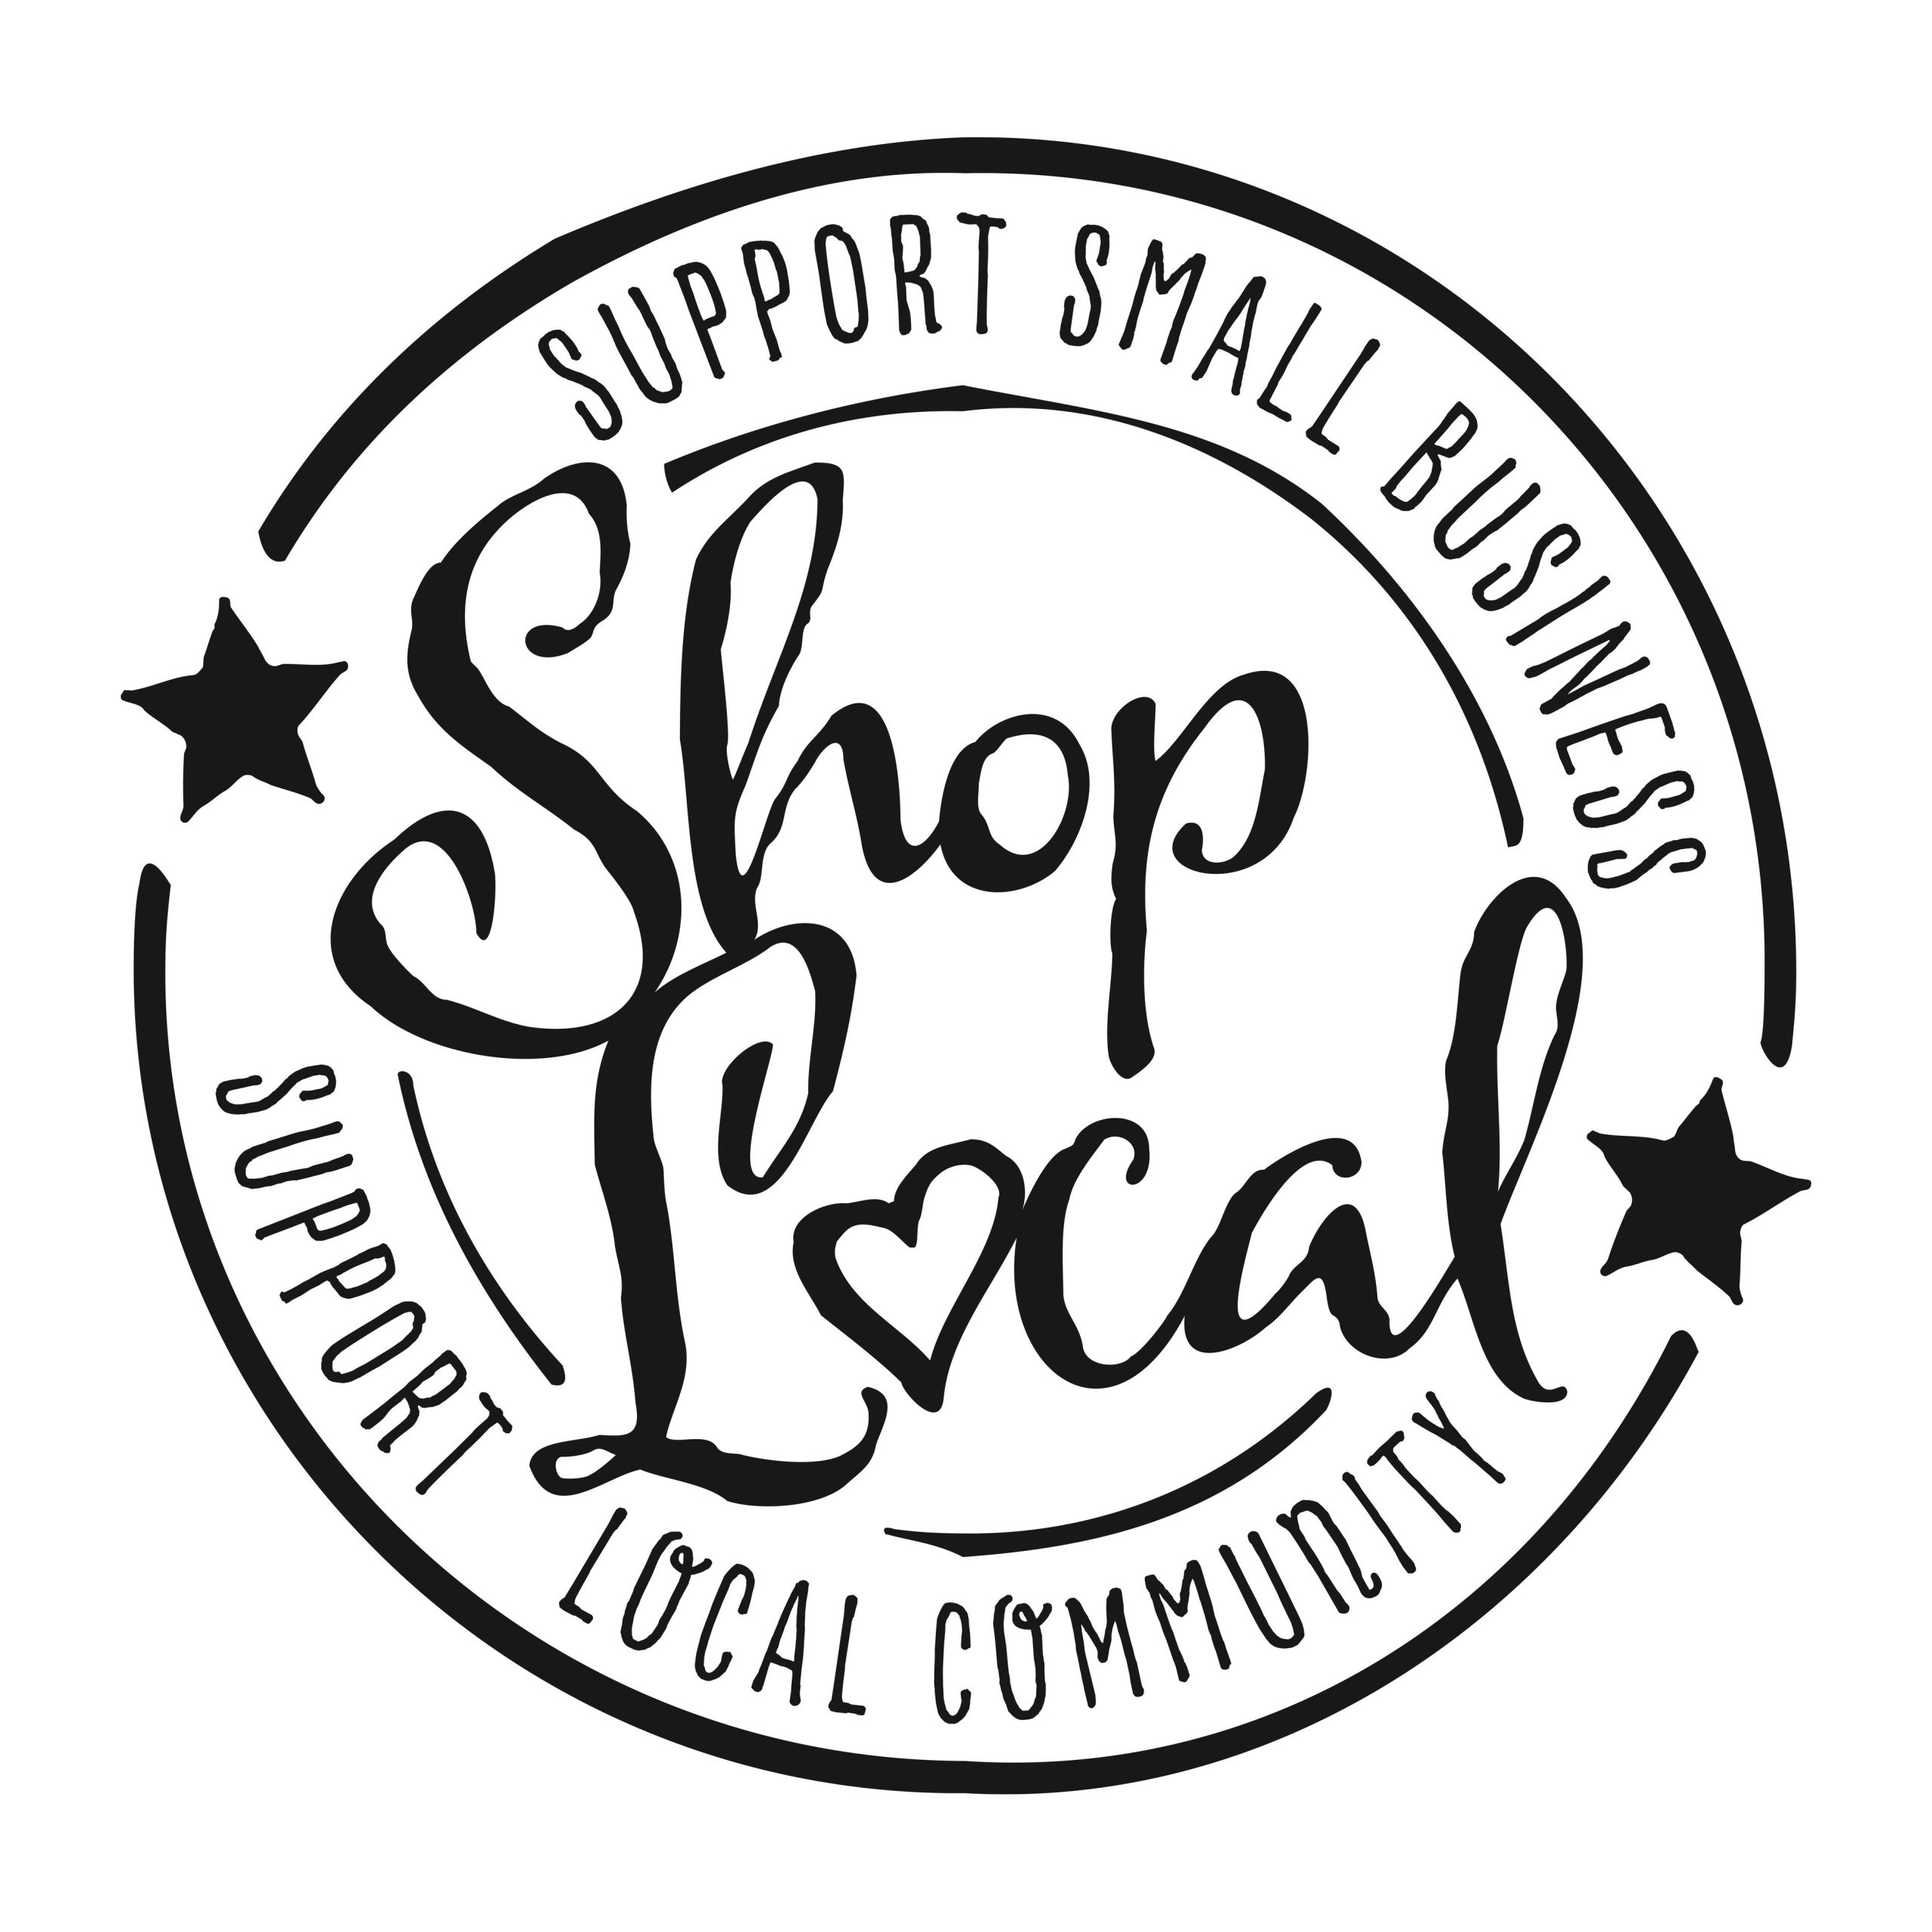 Shop Local: Why You Should Buy from a Small Business